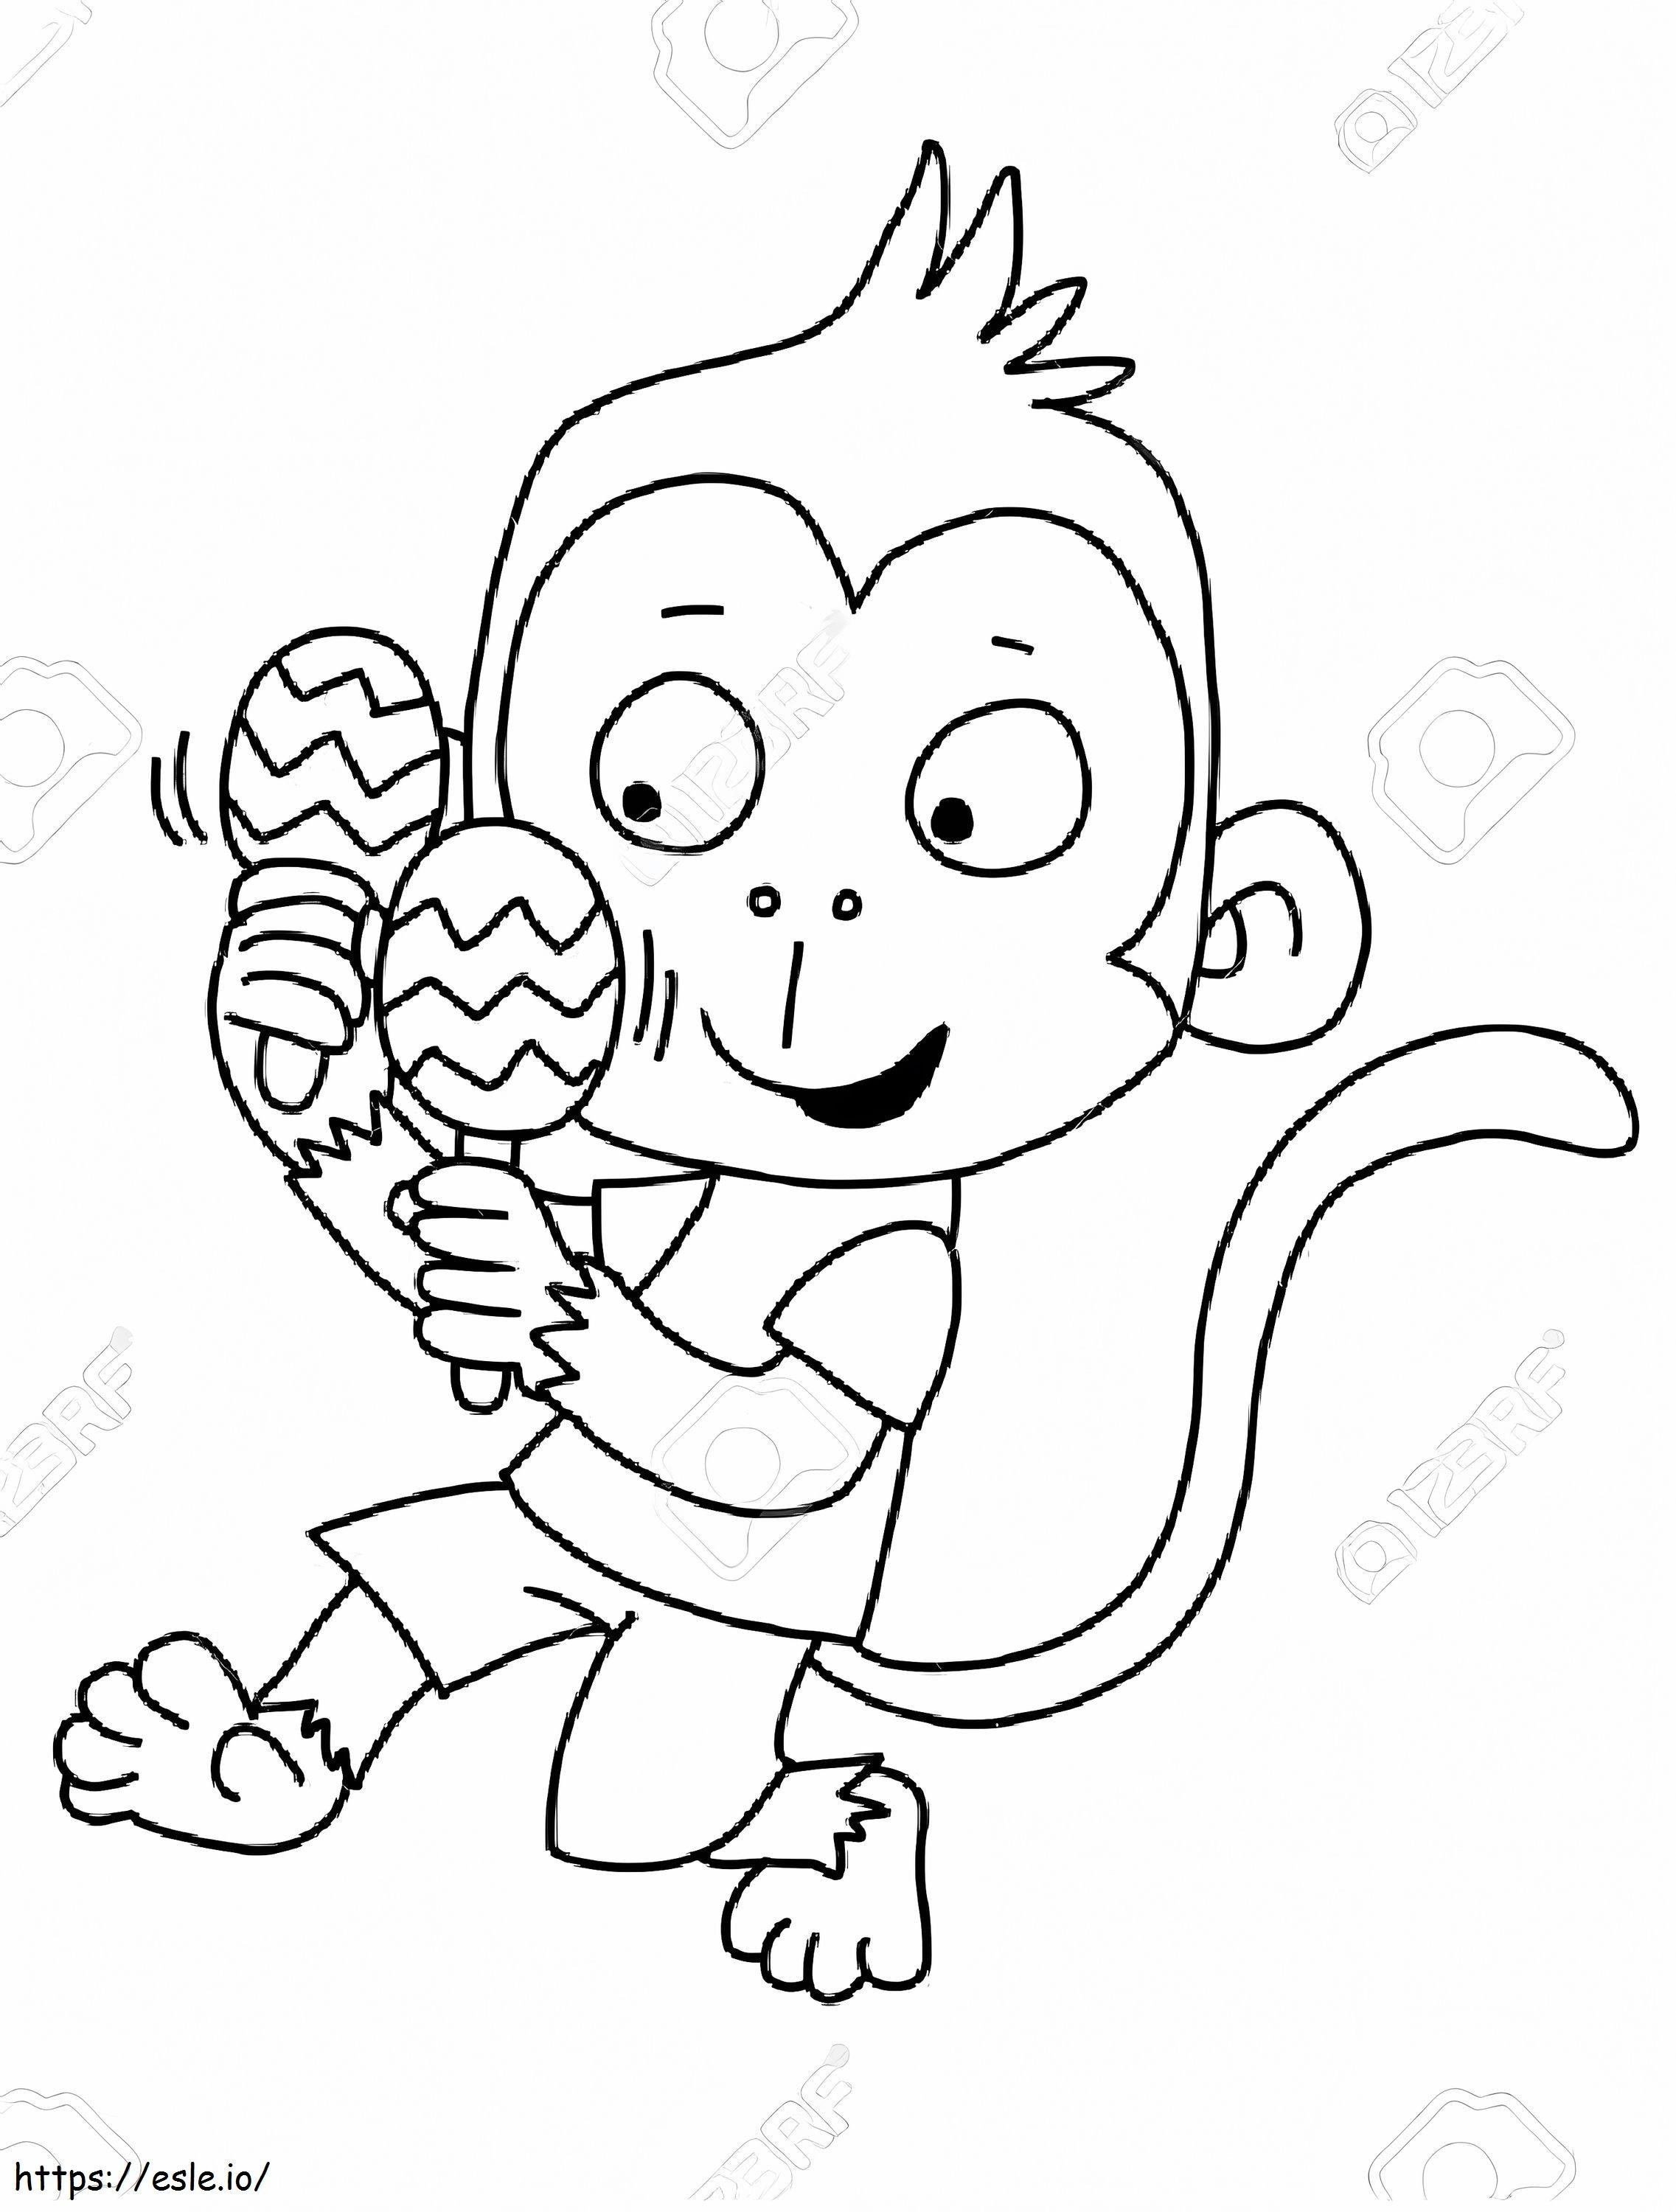 1570499295 69107501 Cute Monkey With Maracas coloring page